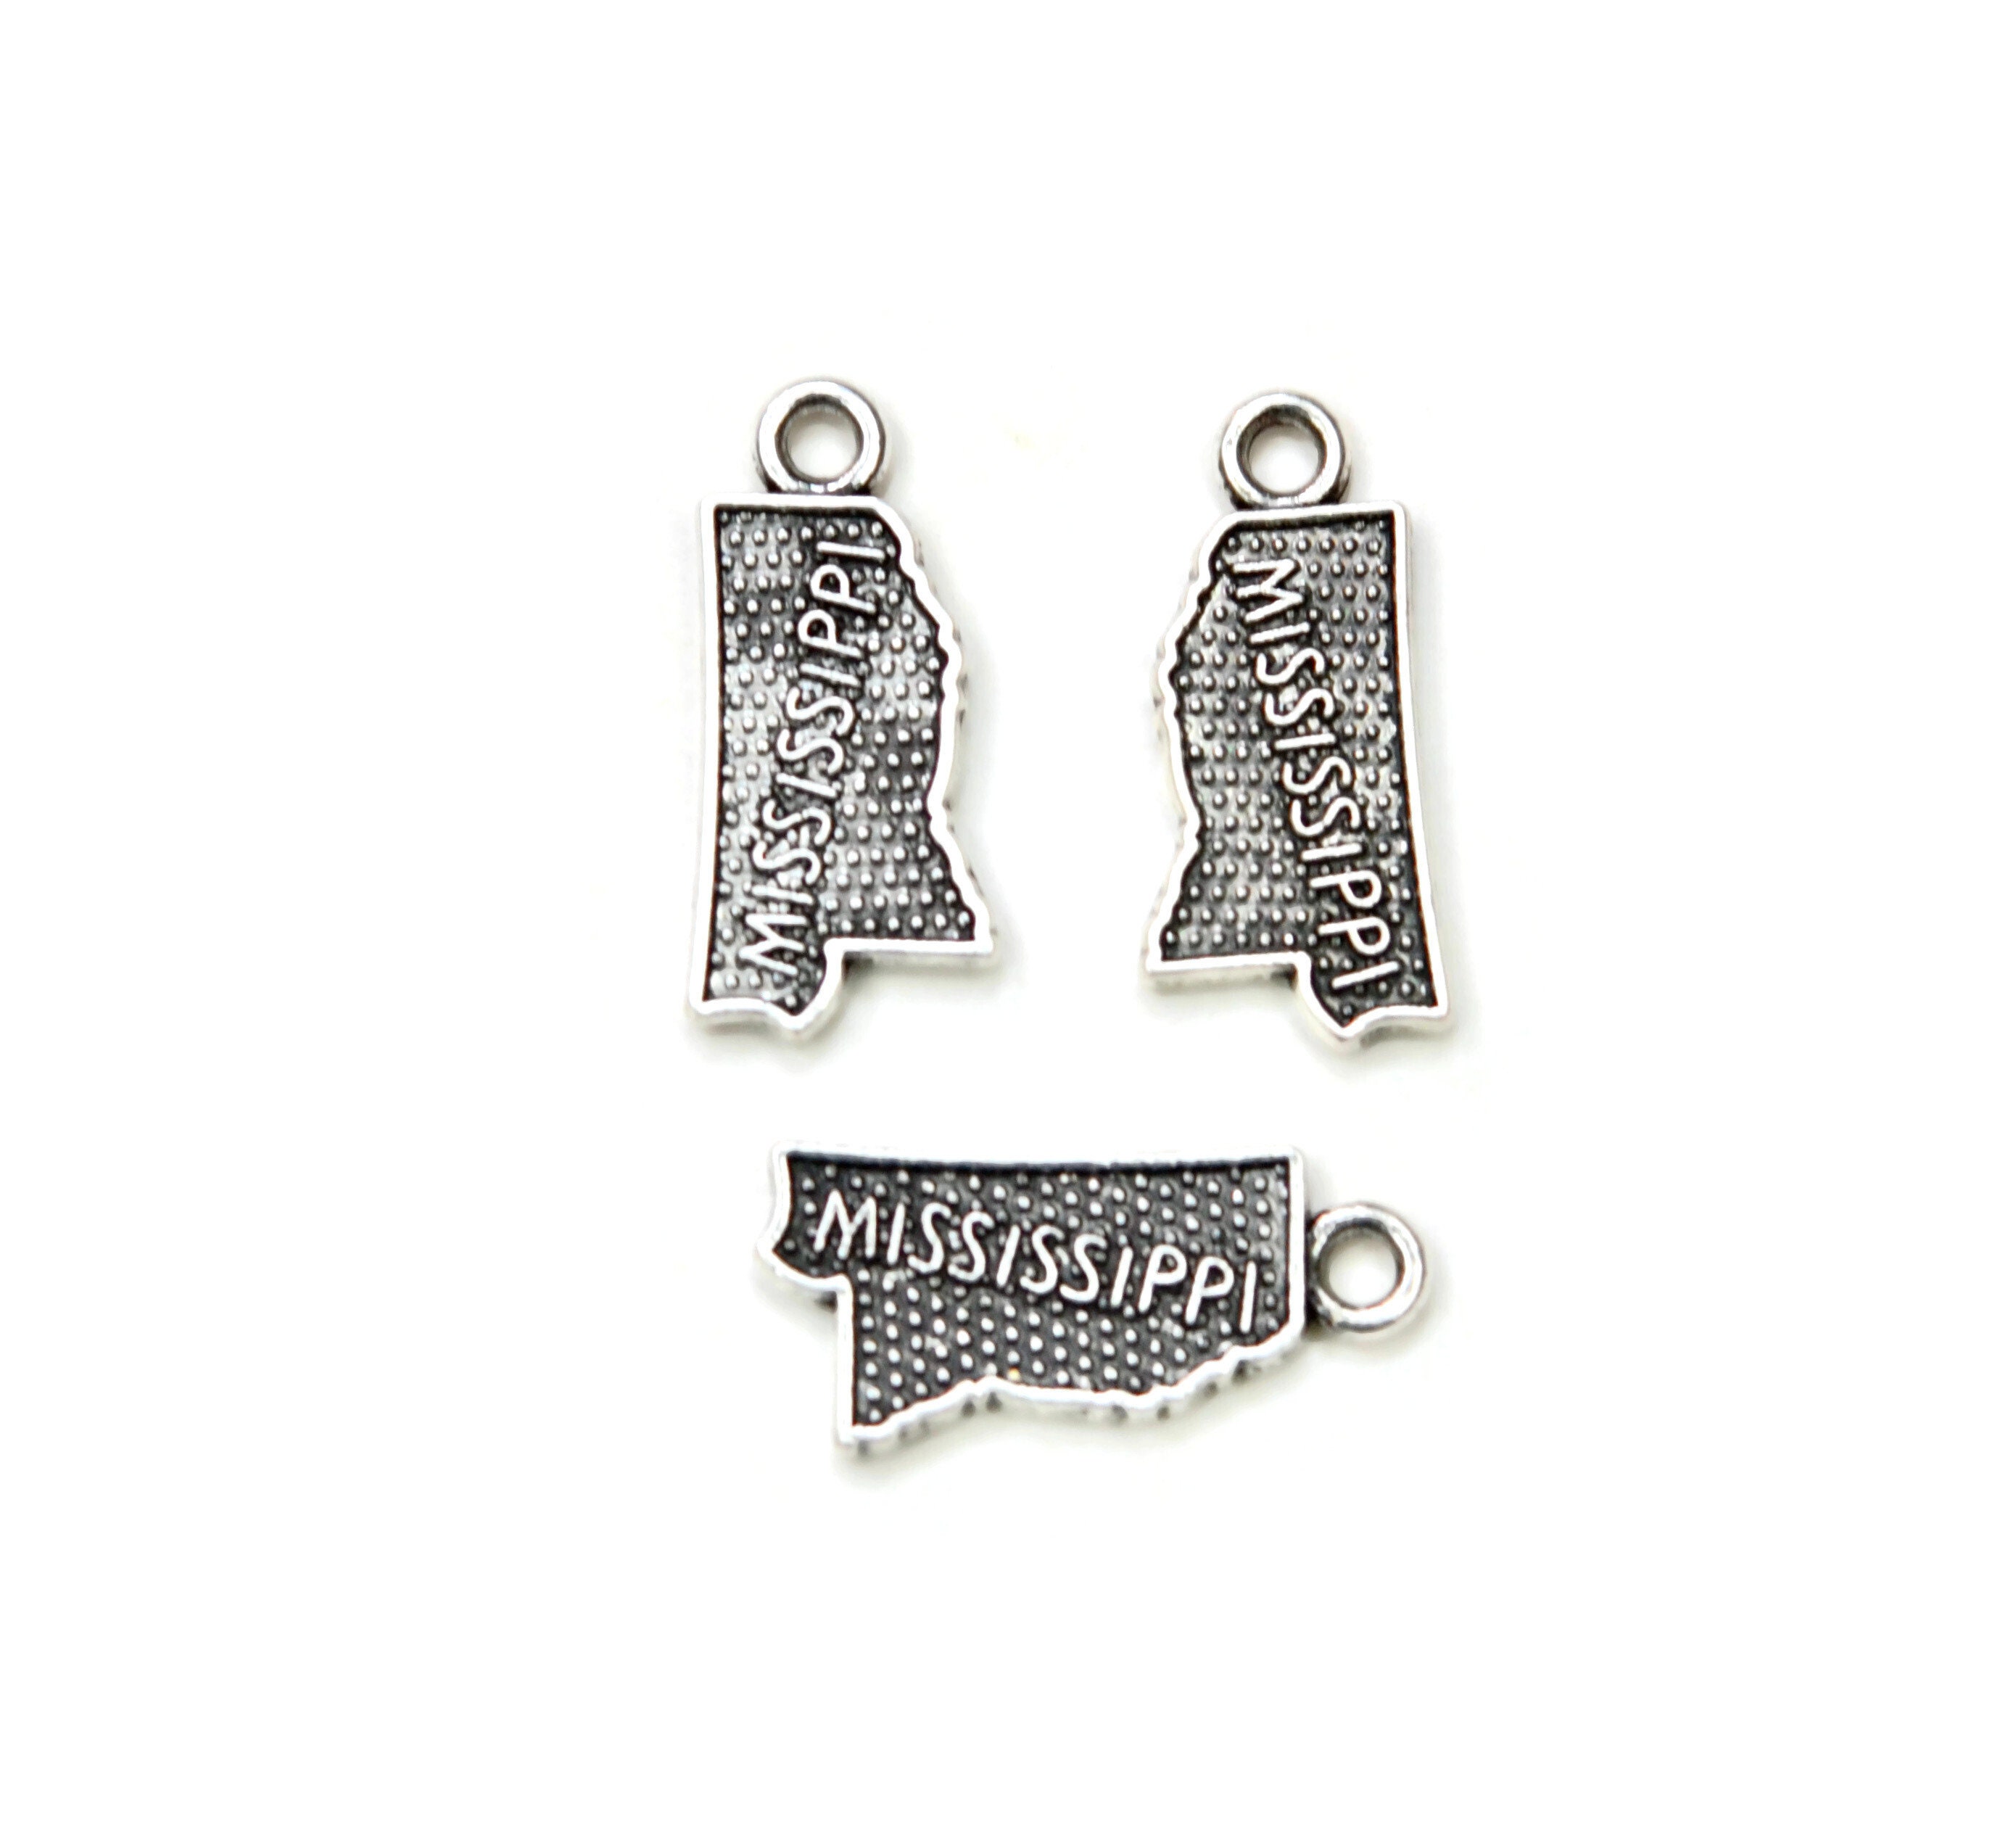 BULK 20 State of Mississippi Silver Tone Charms SC6053 